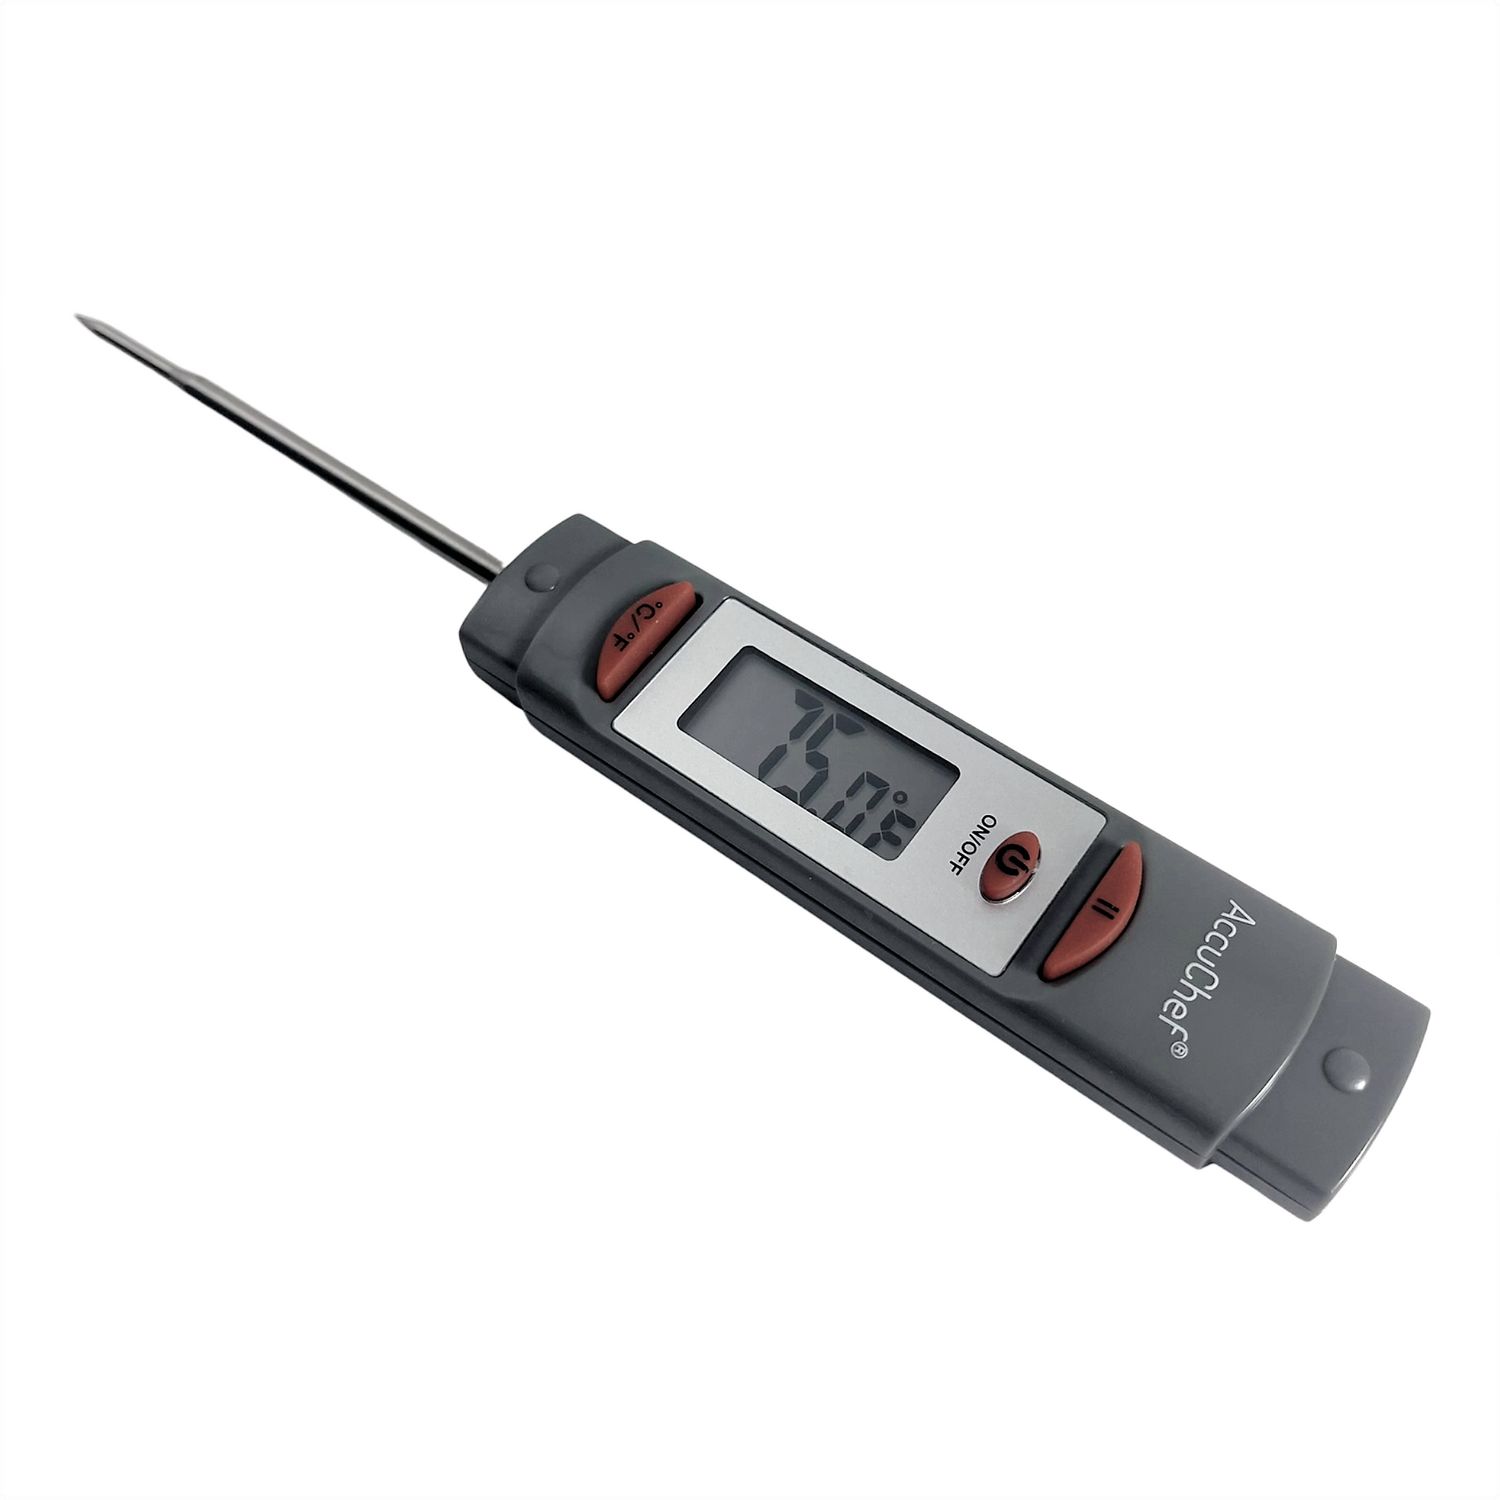 AccuChef Digital Instant Read thermometer, model 2255, Registers